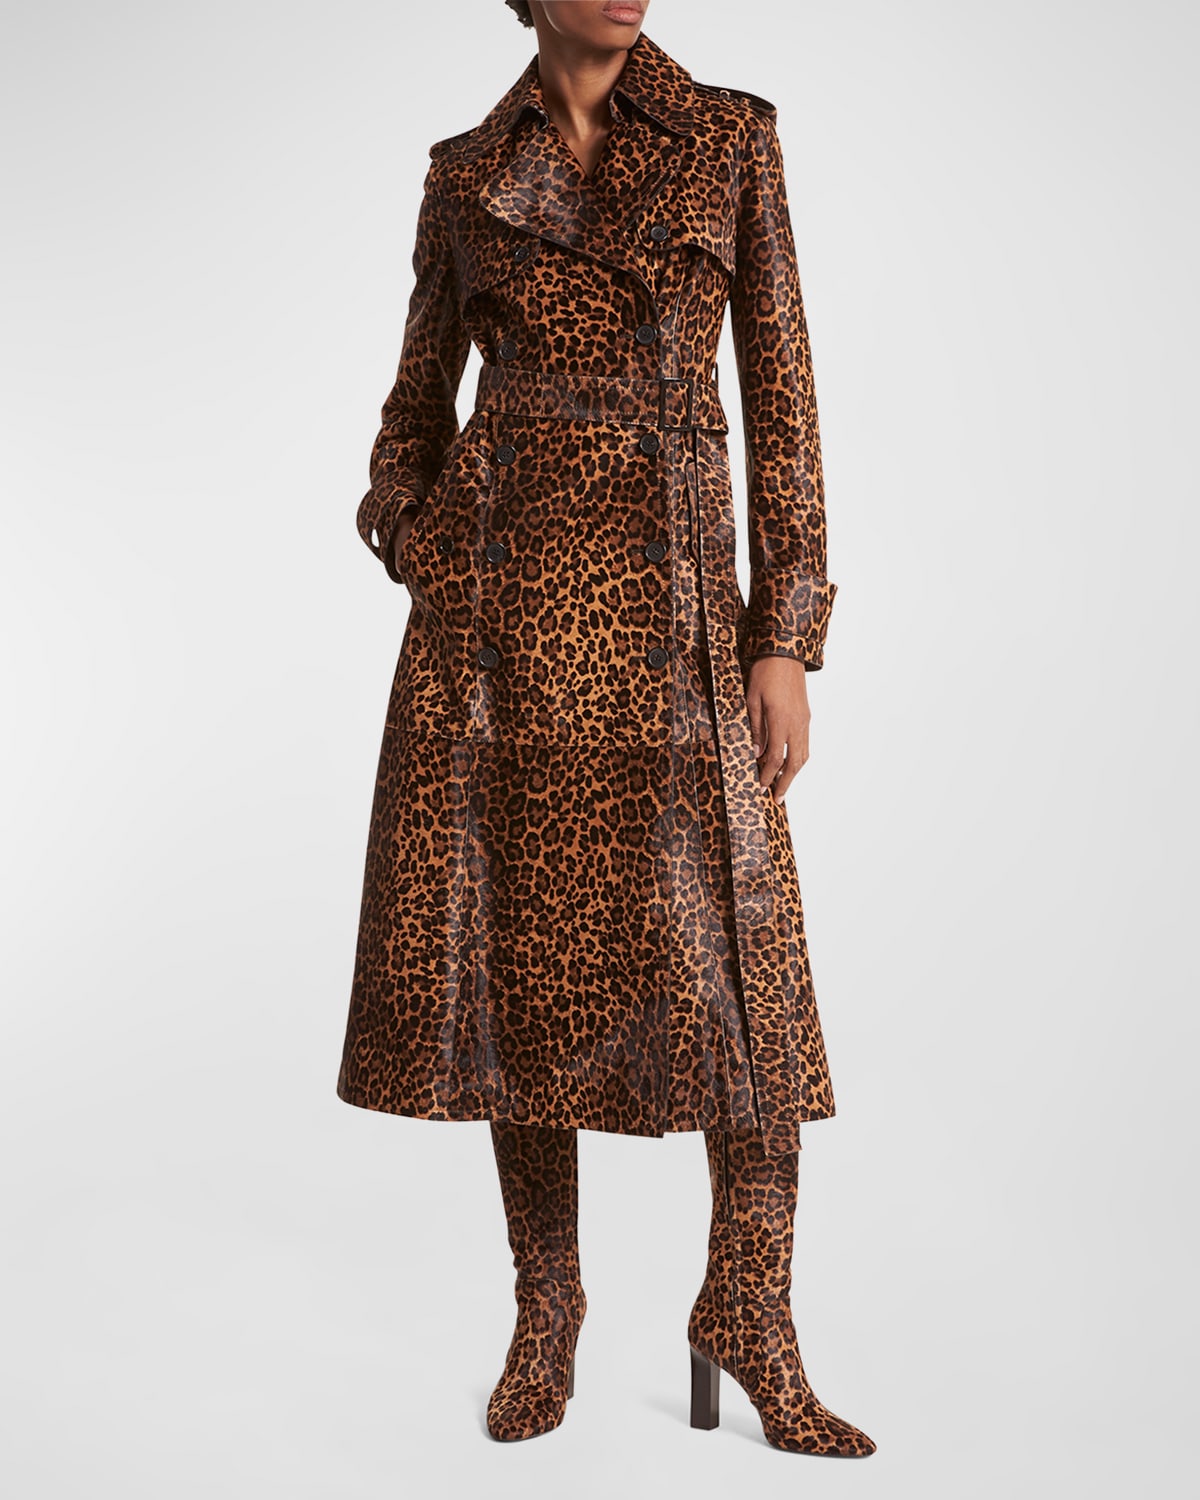 MICHAEL KORS LEOPARD-PRINT COWHIDE BELTED LONG TRENCH COAT